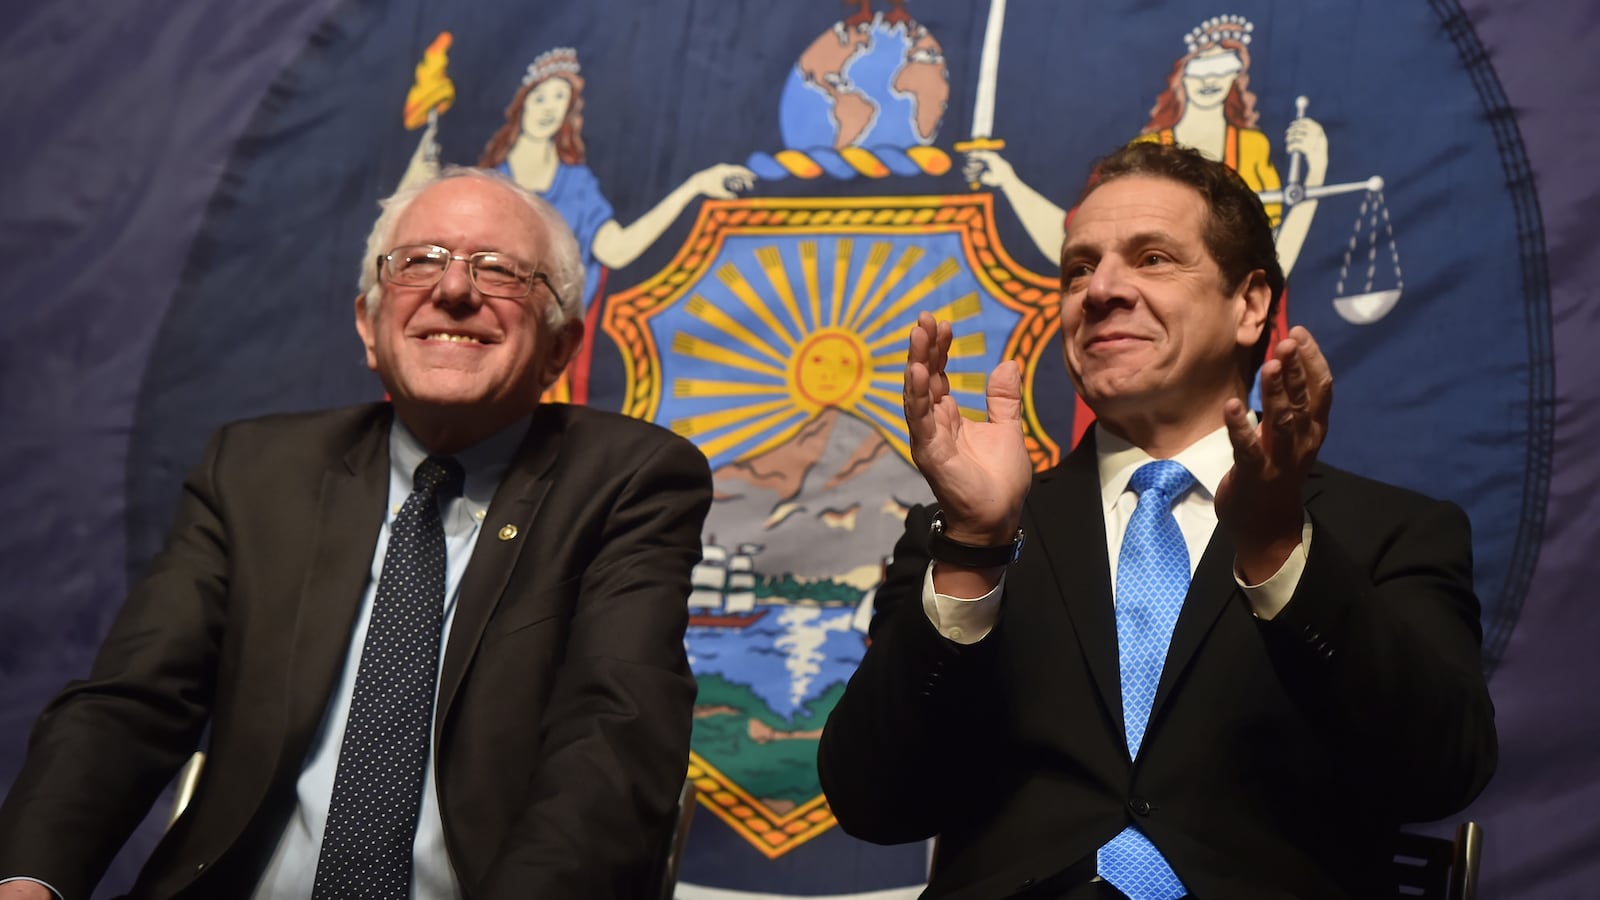 Governor Cuomo proposes making college tuition-free for New York’s middle-class families.